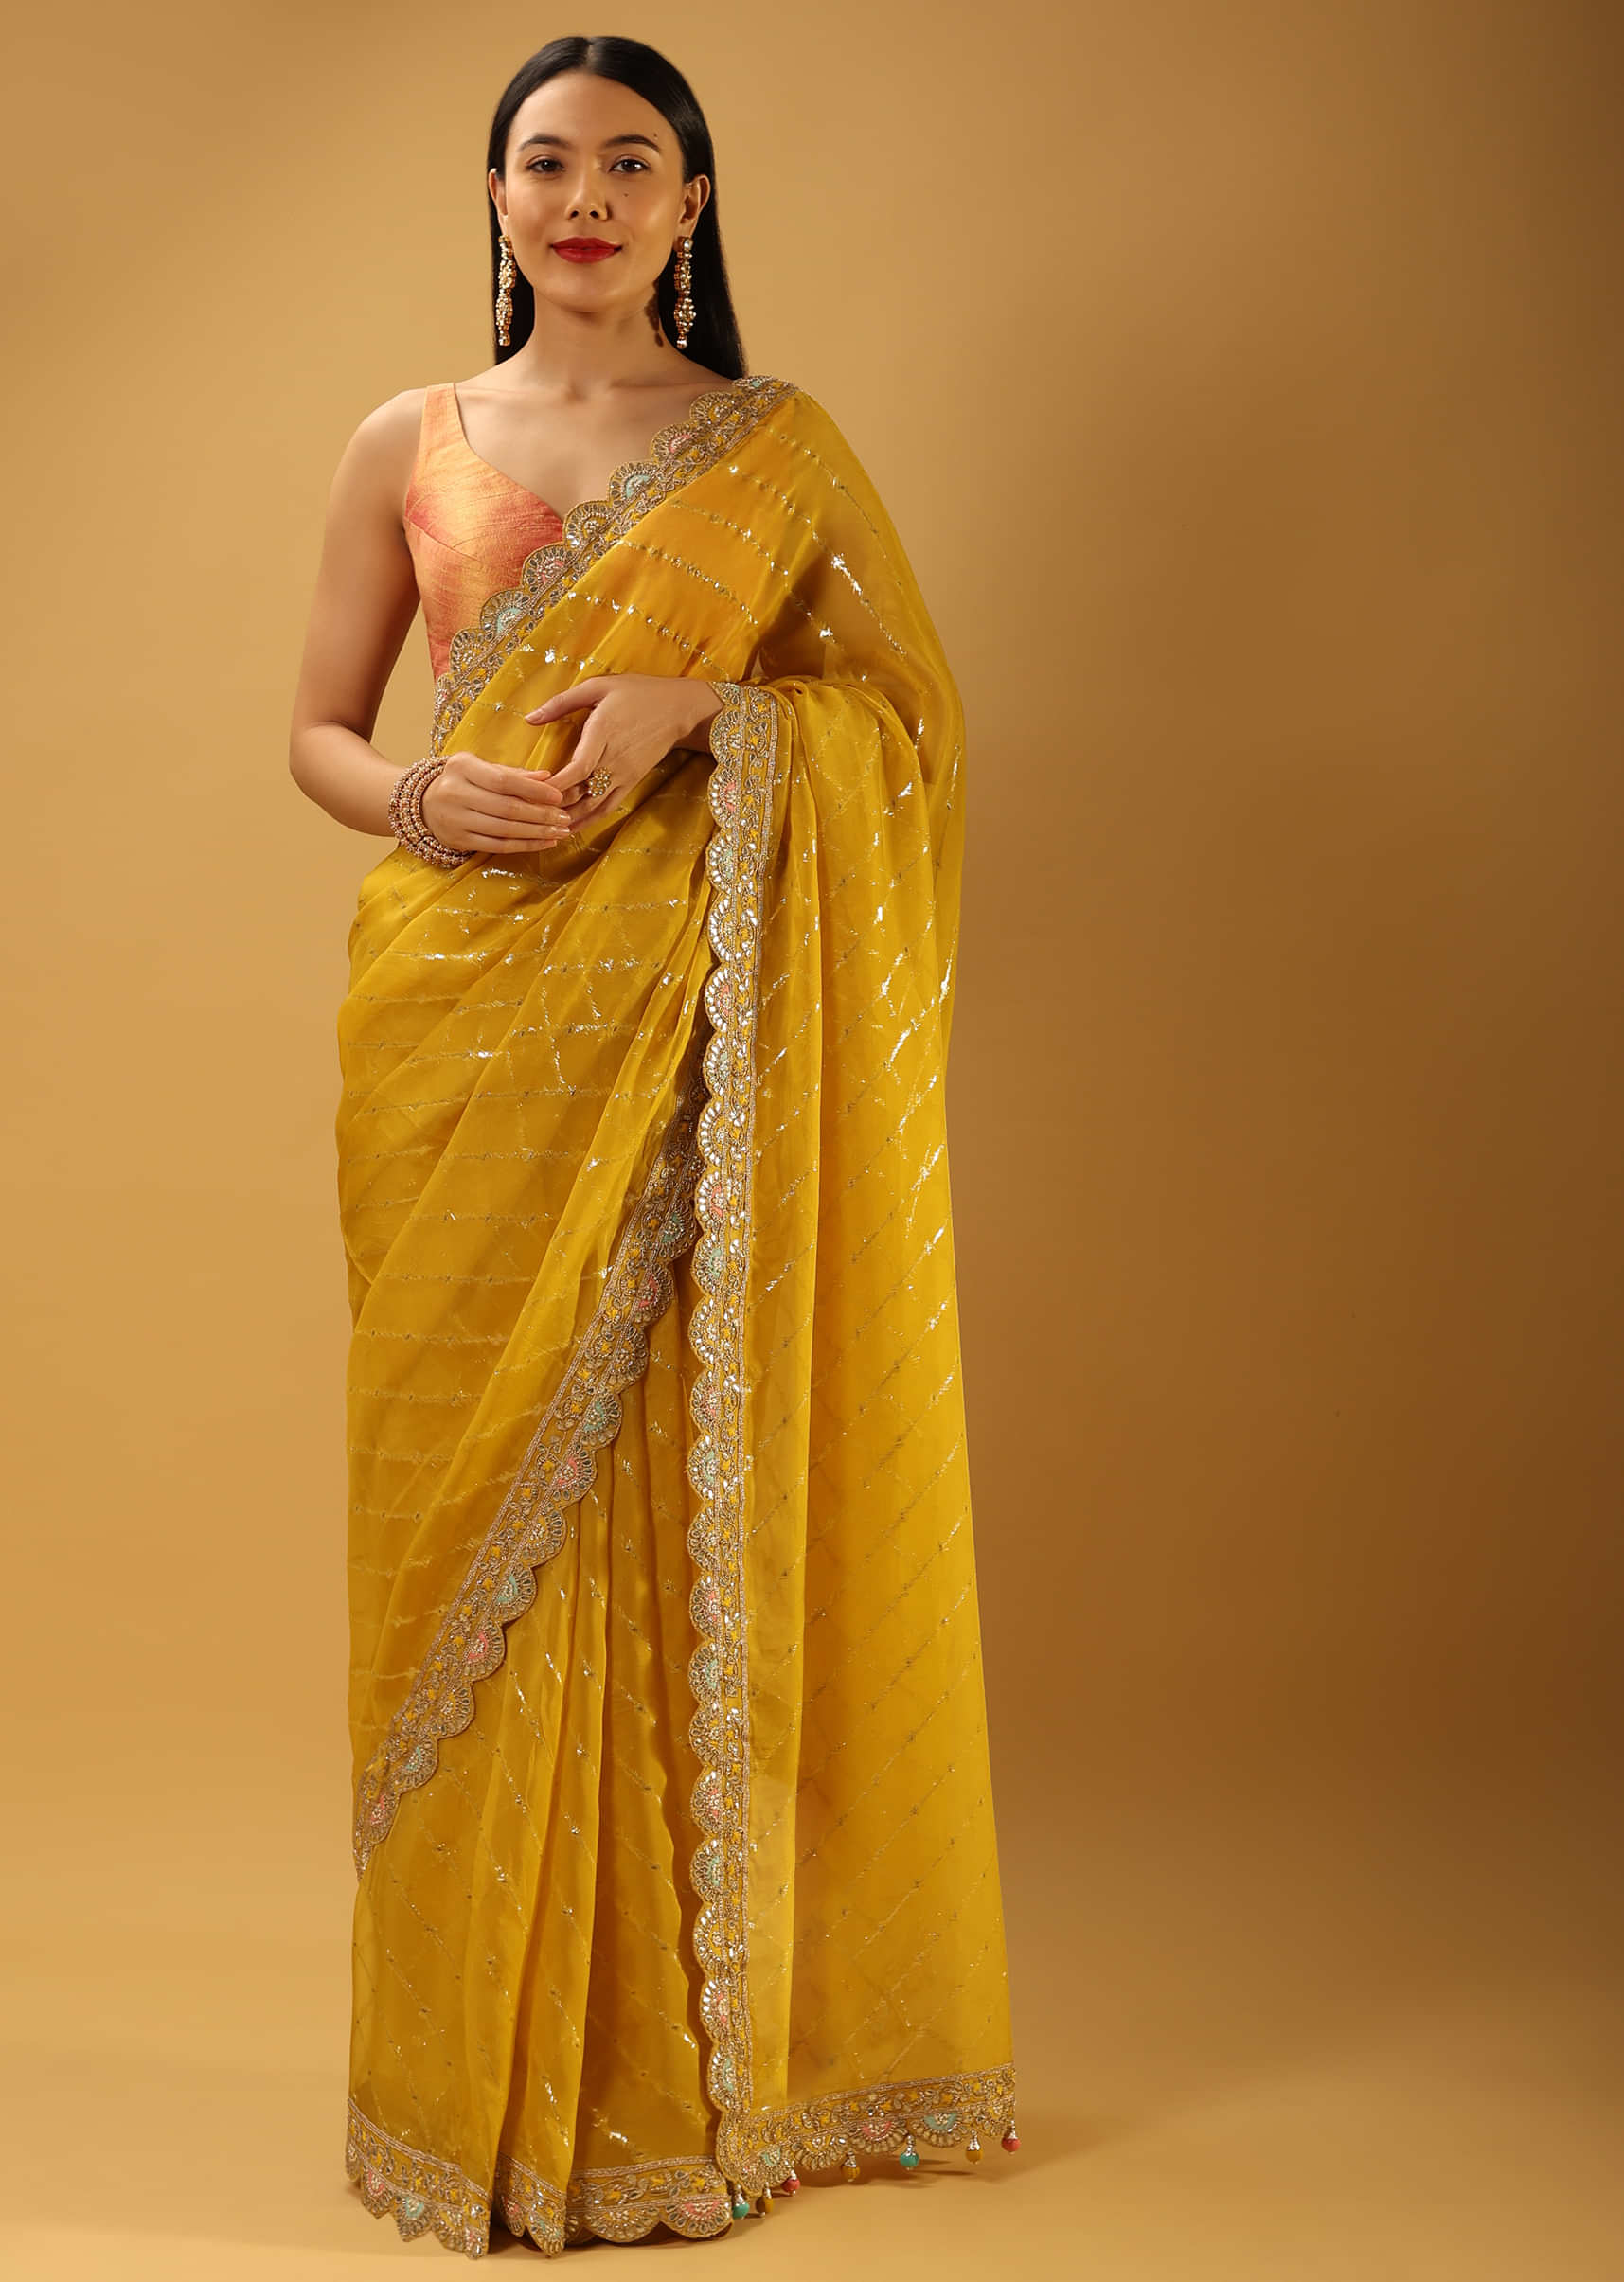 Canary Yellow Saree In Organza With Lurex Stripes And Multi Colored Applique Embroidered Scallop Border